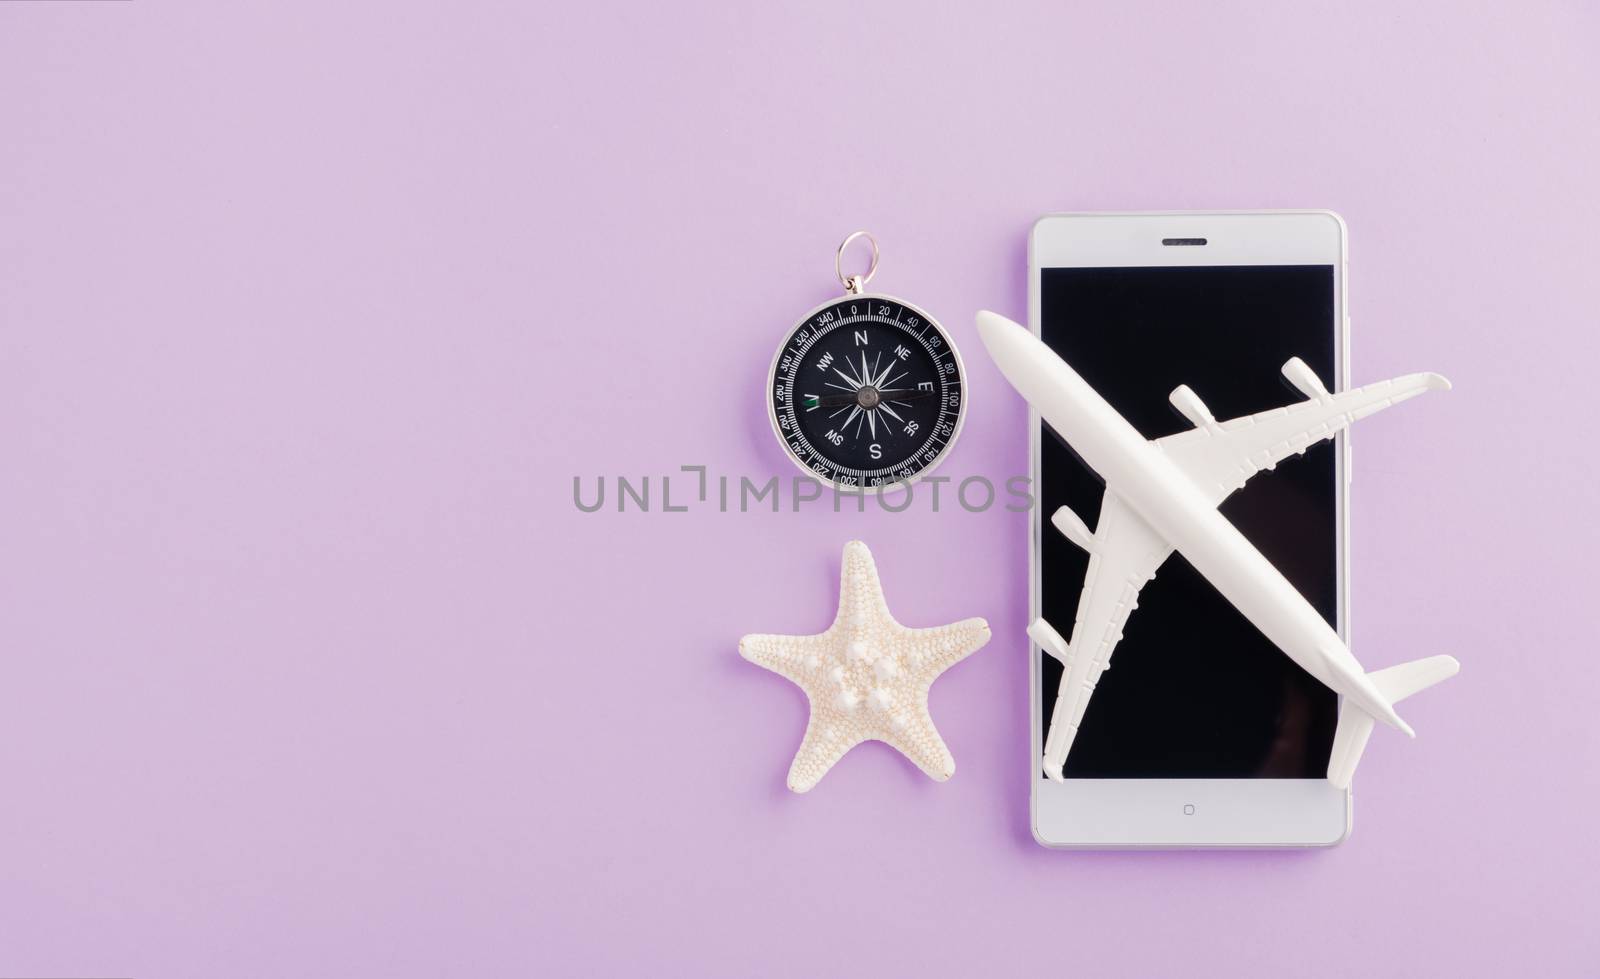 World Tourism Day, Top view of minimal model plane, airplane, starfish, alarm clock, compass on smartphone blank screen, studio shot isolated on a purple background, accessory flight holiday concept